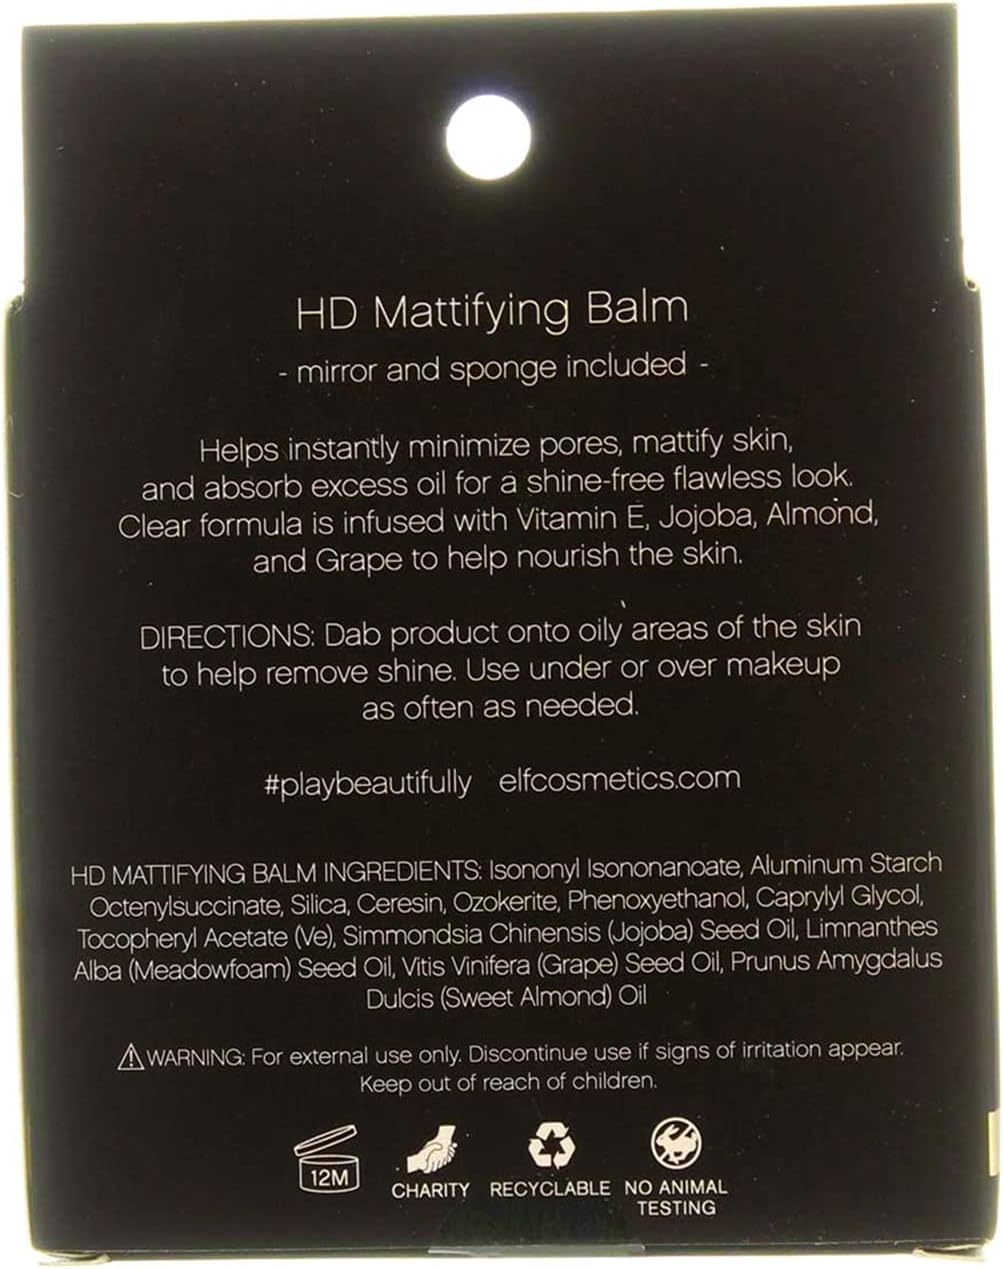 e.l.f. HD Mattifying Balm for use as a Foundation for Your M